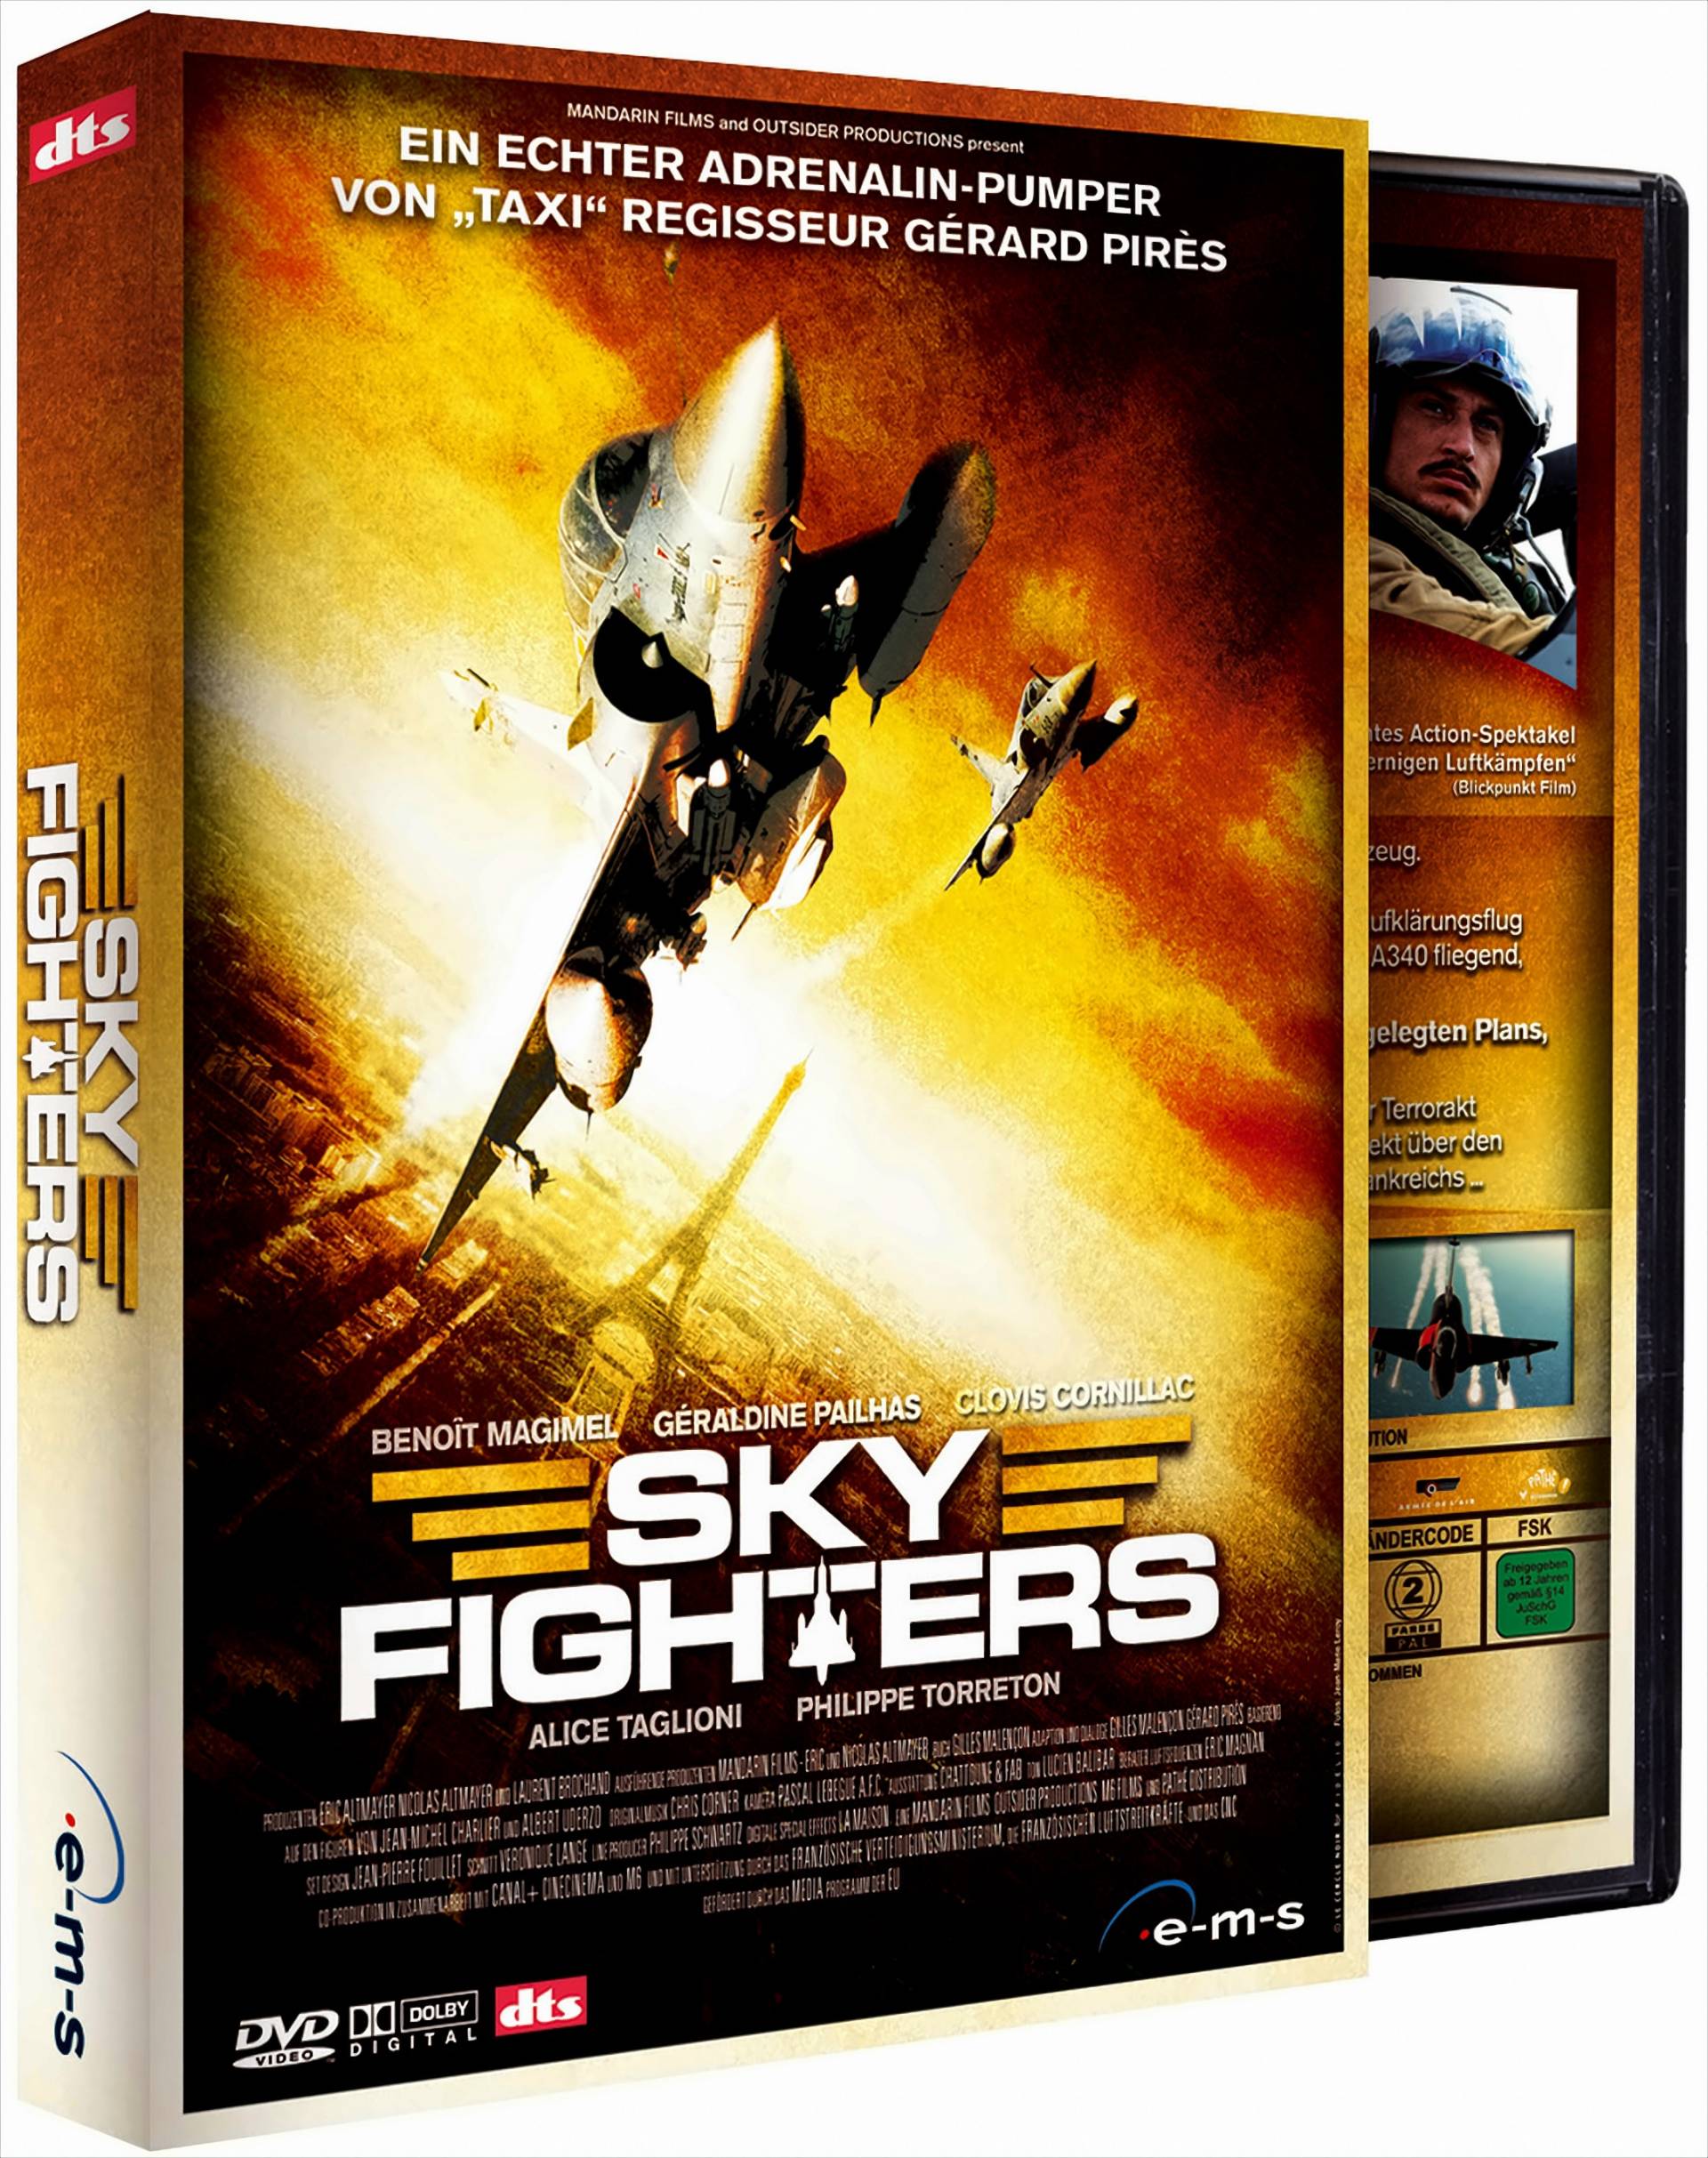 Sky Fighters (Special Edition, 2 DVDs) von e-m-s GmbH